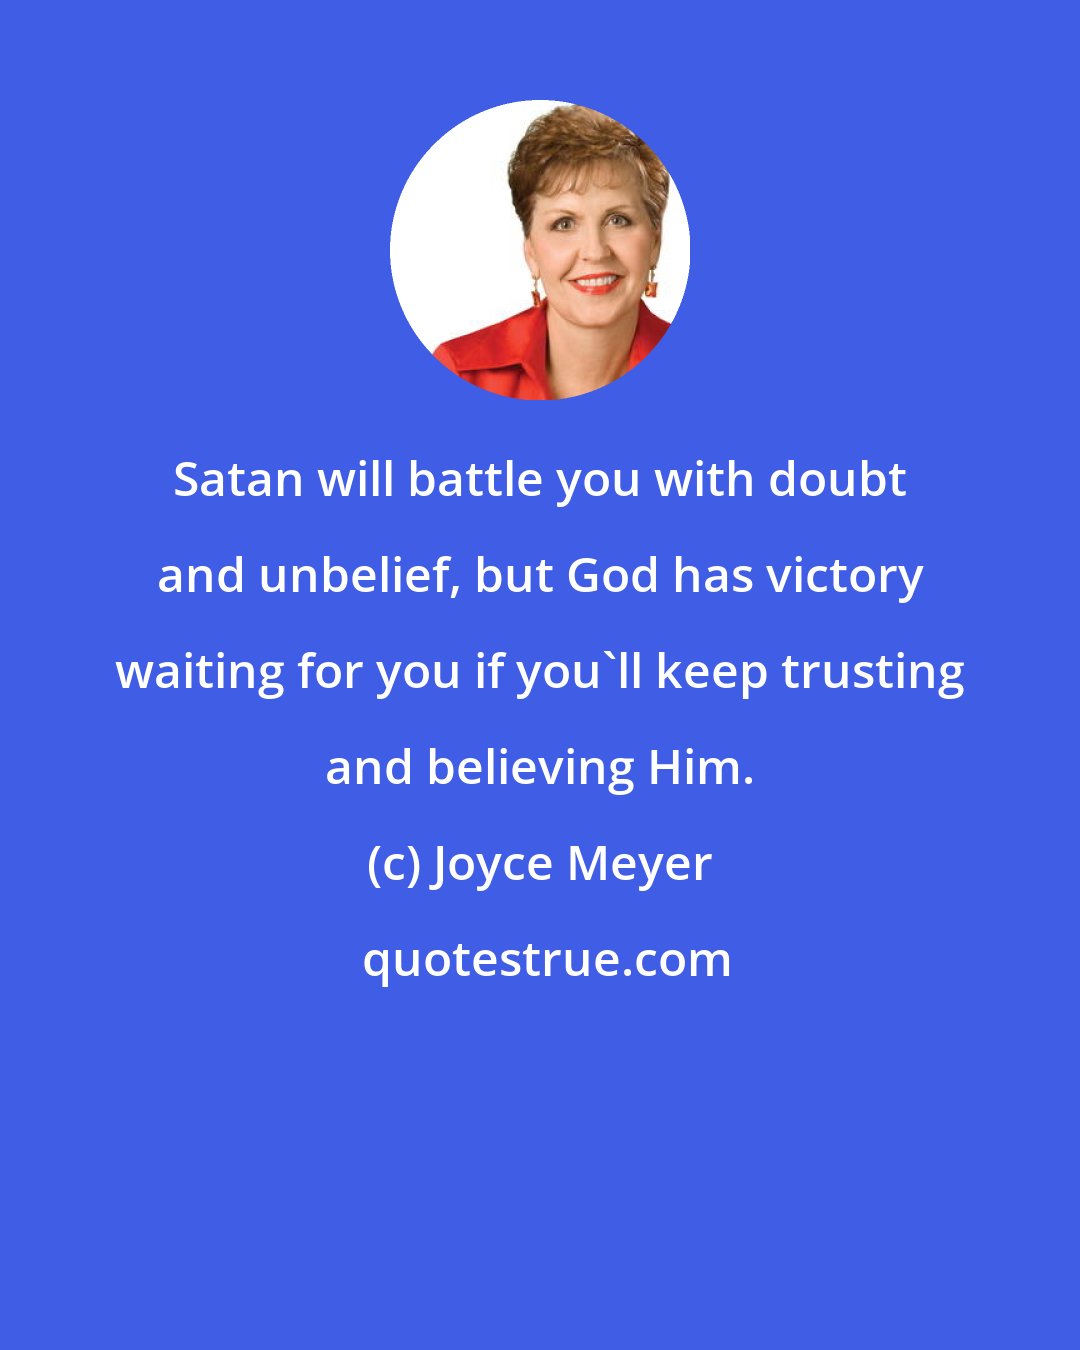 Joyce Meyer: Satan will battle you with doubt and unbelief, but God has victory waiting for you if you'll keep trusting and believing Him.